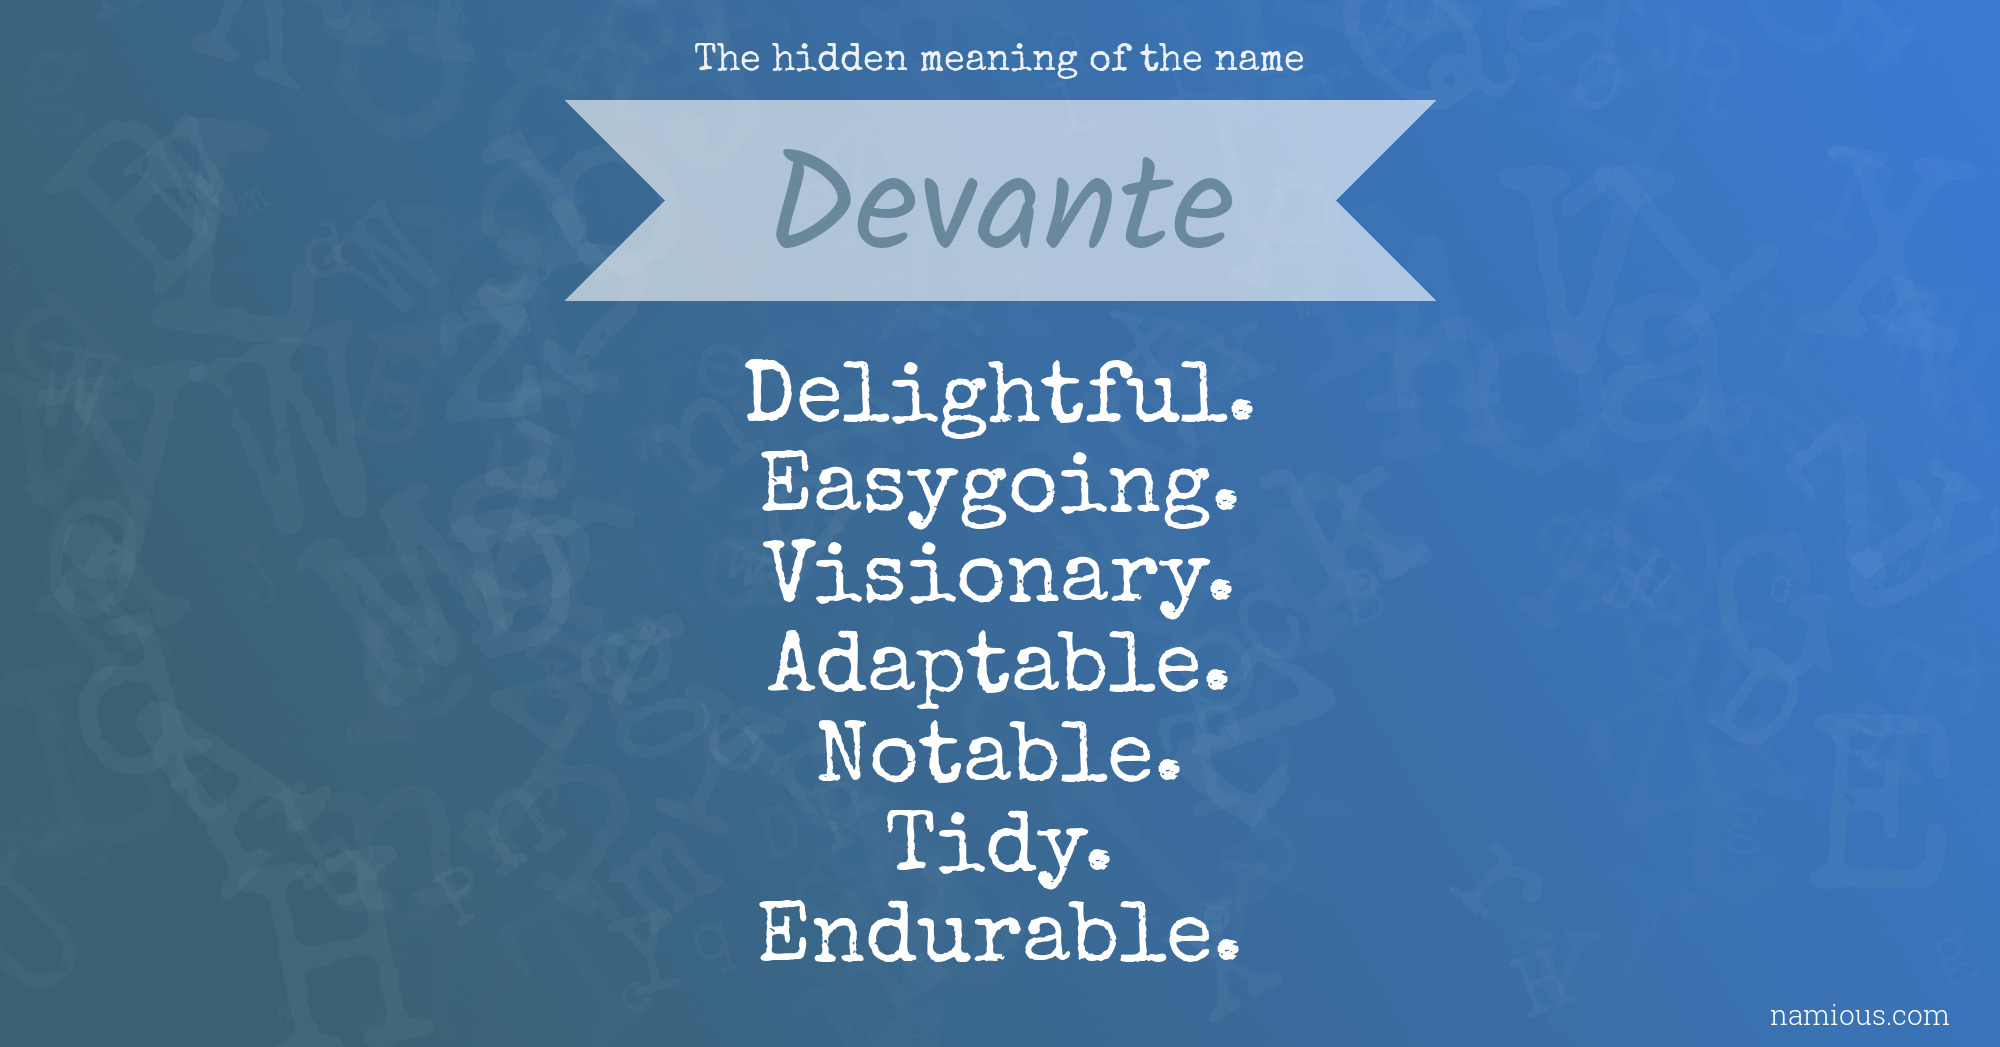 The hidden meaning of the name Devante